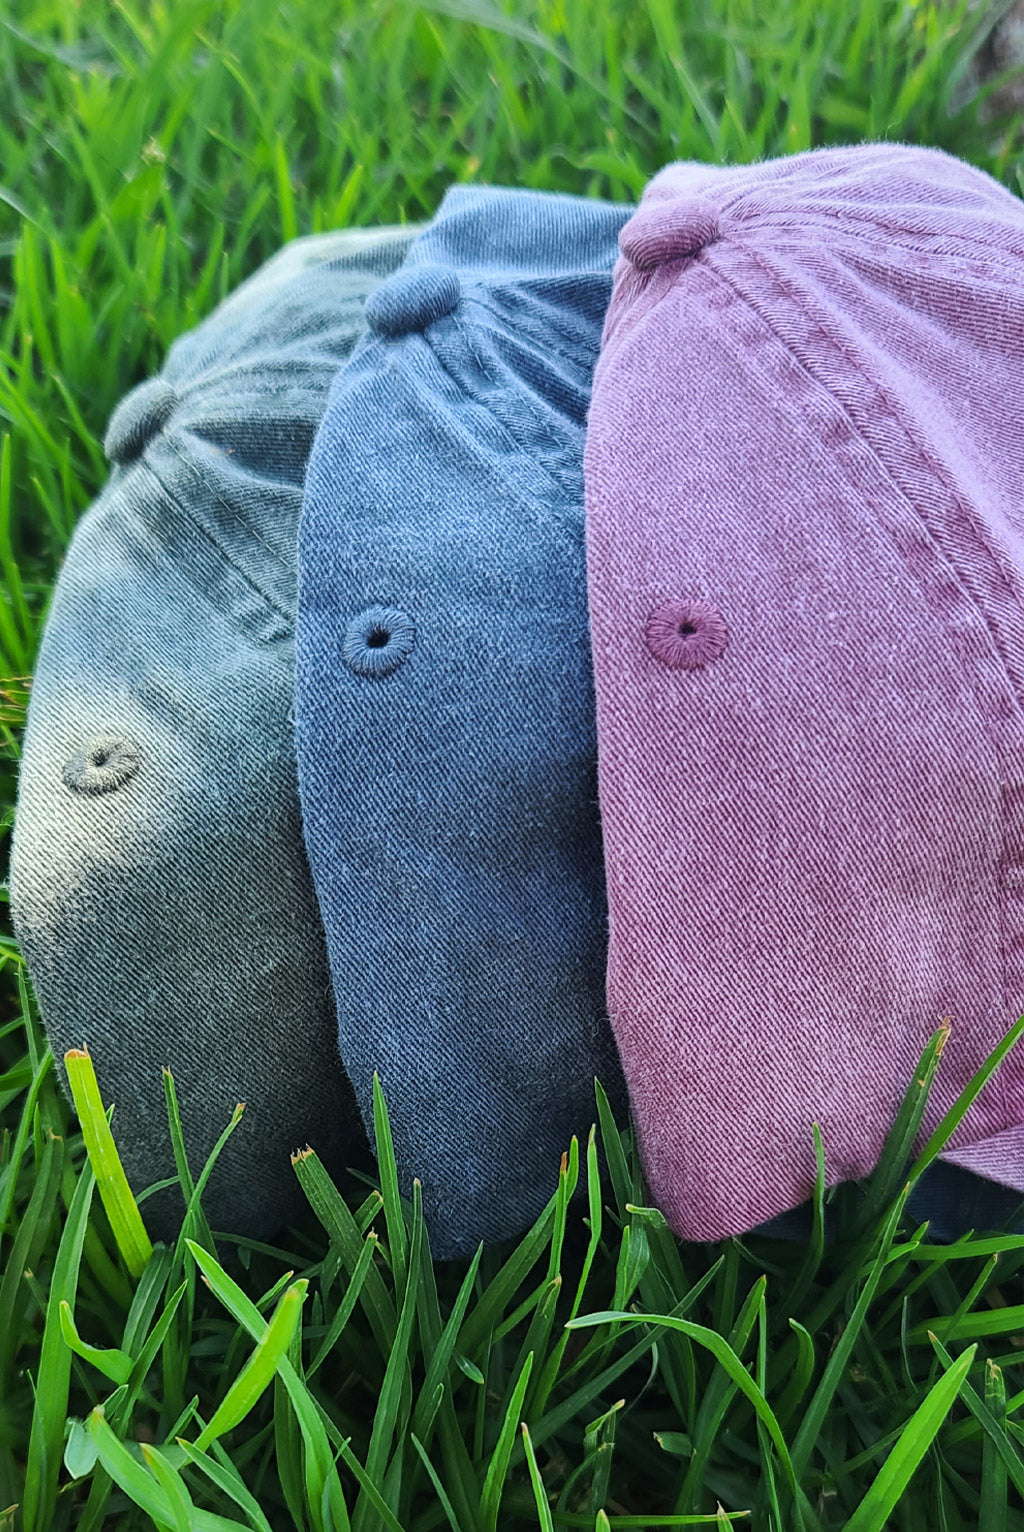 Superfit Hero Baseball Caps - Washed Green, Washed Grey, Washed Maroon (left to right)